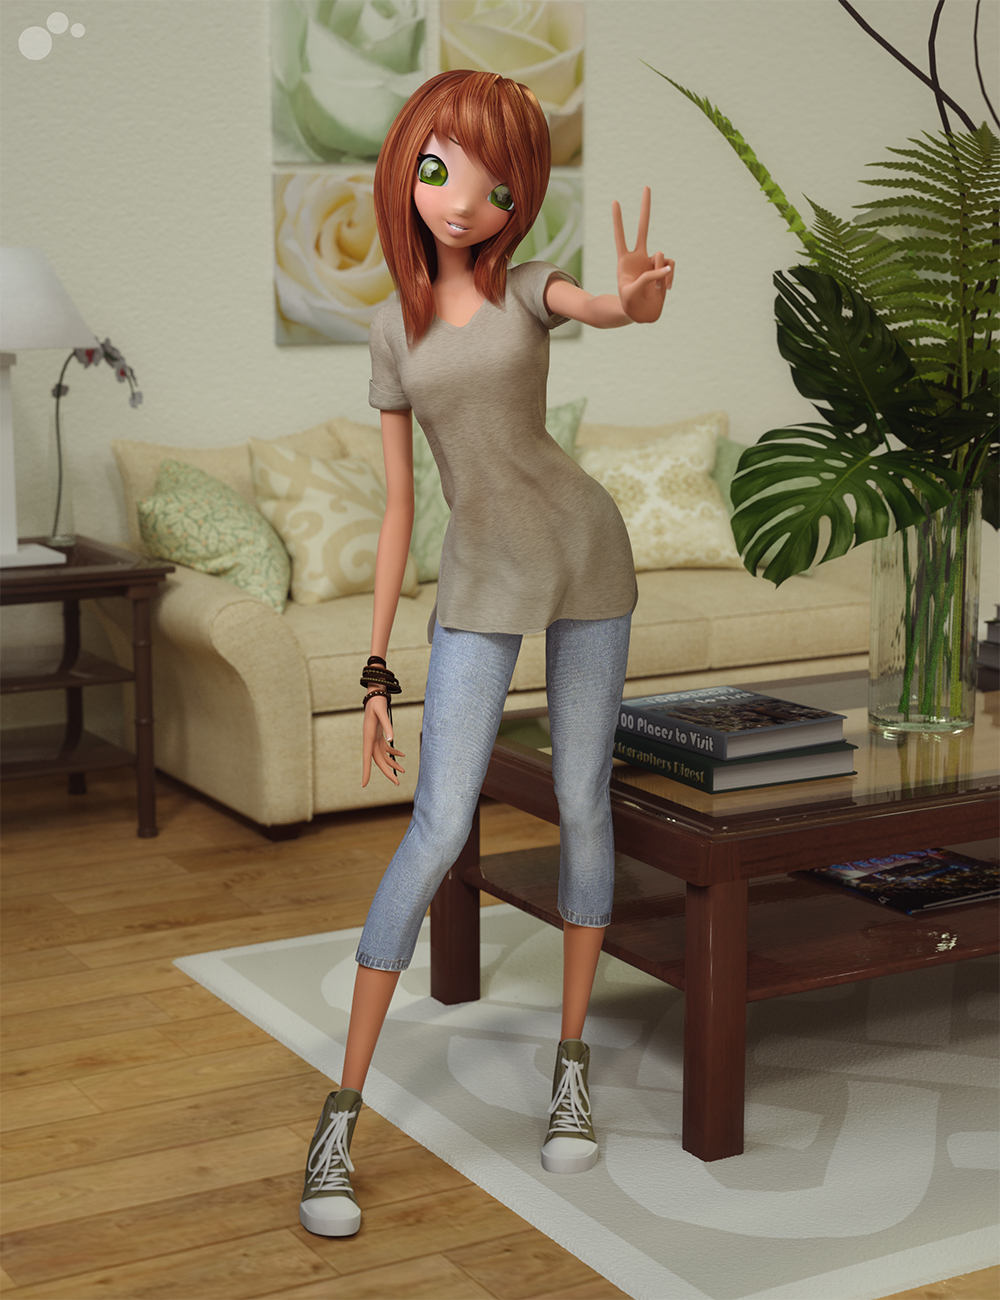 IGD AnnieMae Poses for Star 2.0 by: Islandgirl, 3D Models by Daz 3D